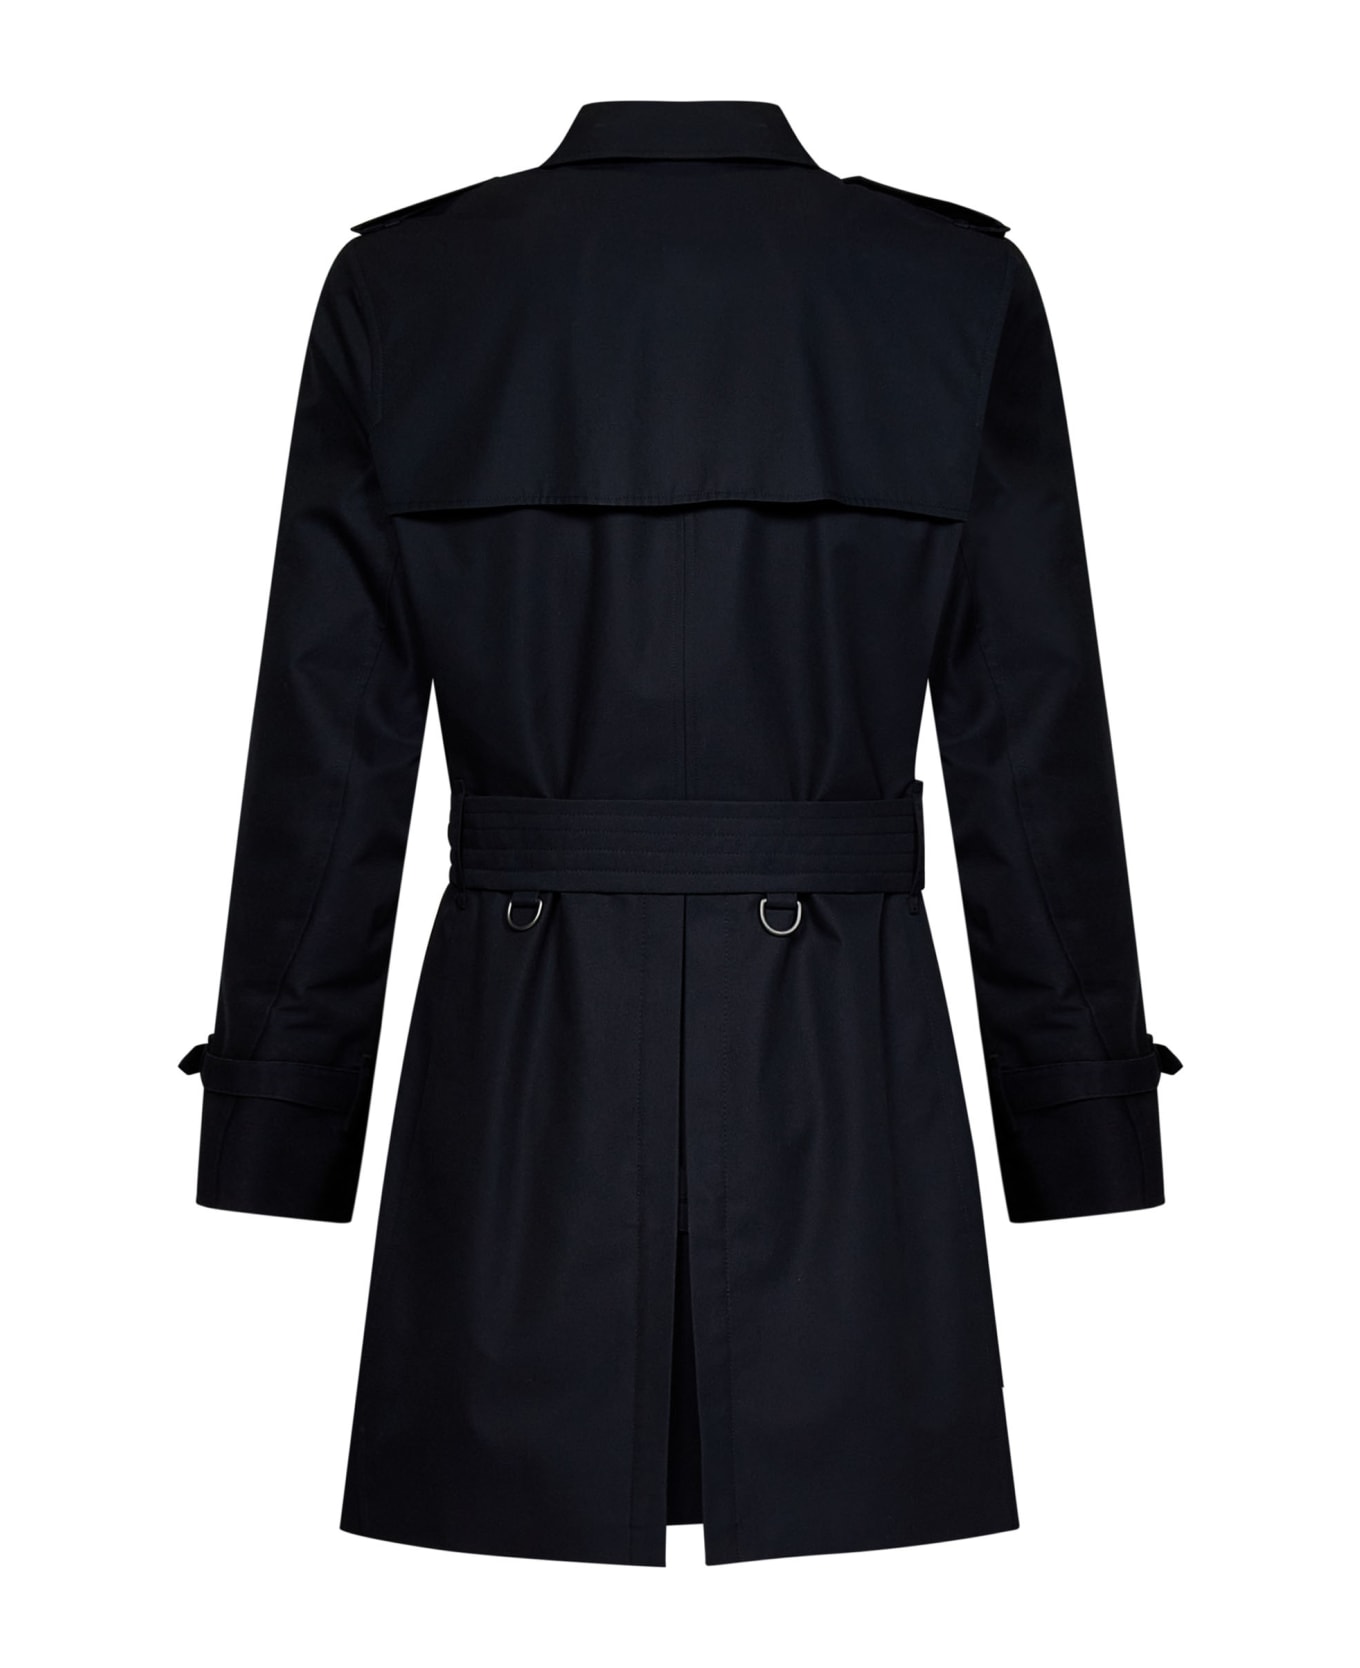 Burberry 'wimbledon' Blue Double-breasted Trench Coat With Belt And Branded Buttons In Cotton Man - Midnight